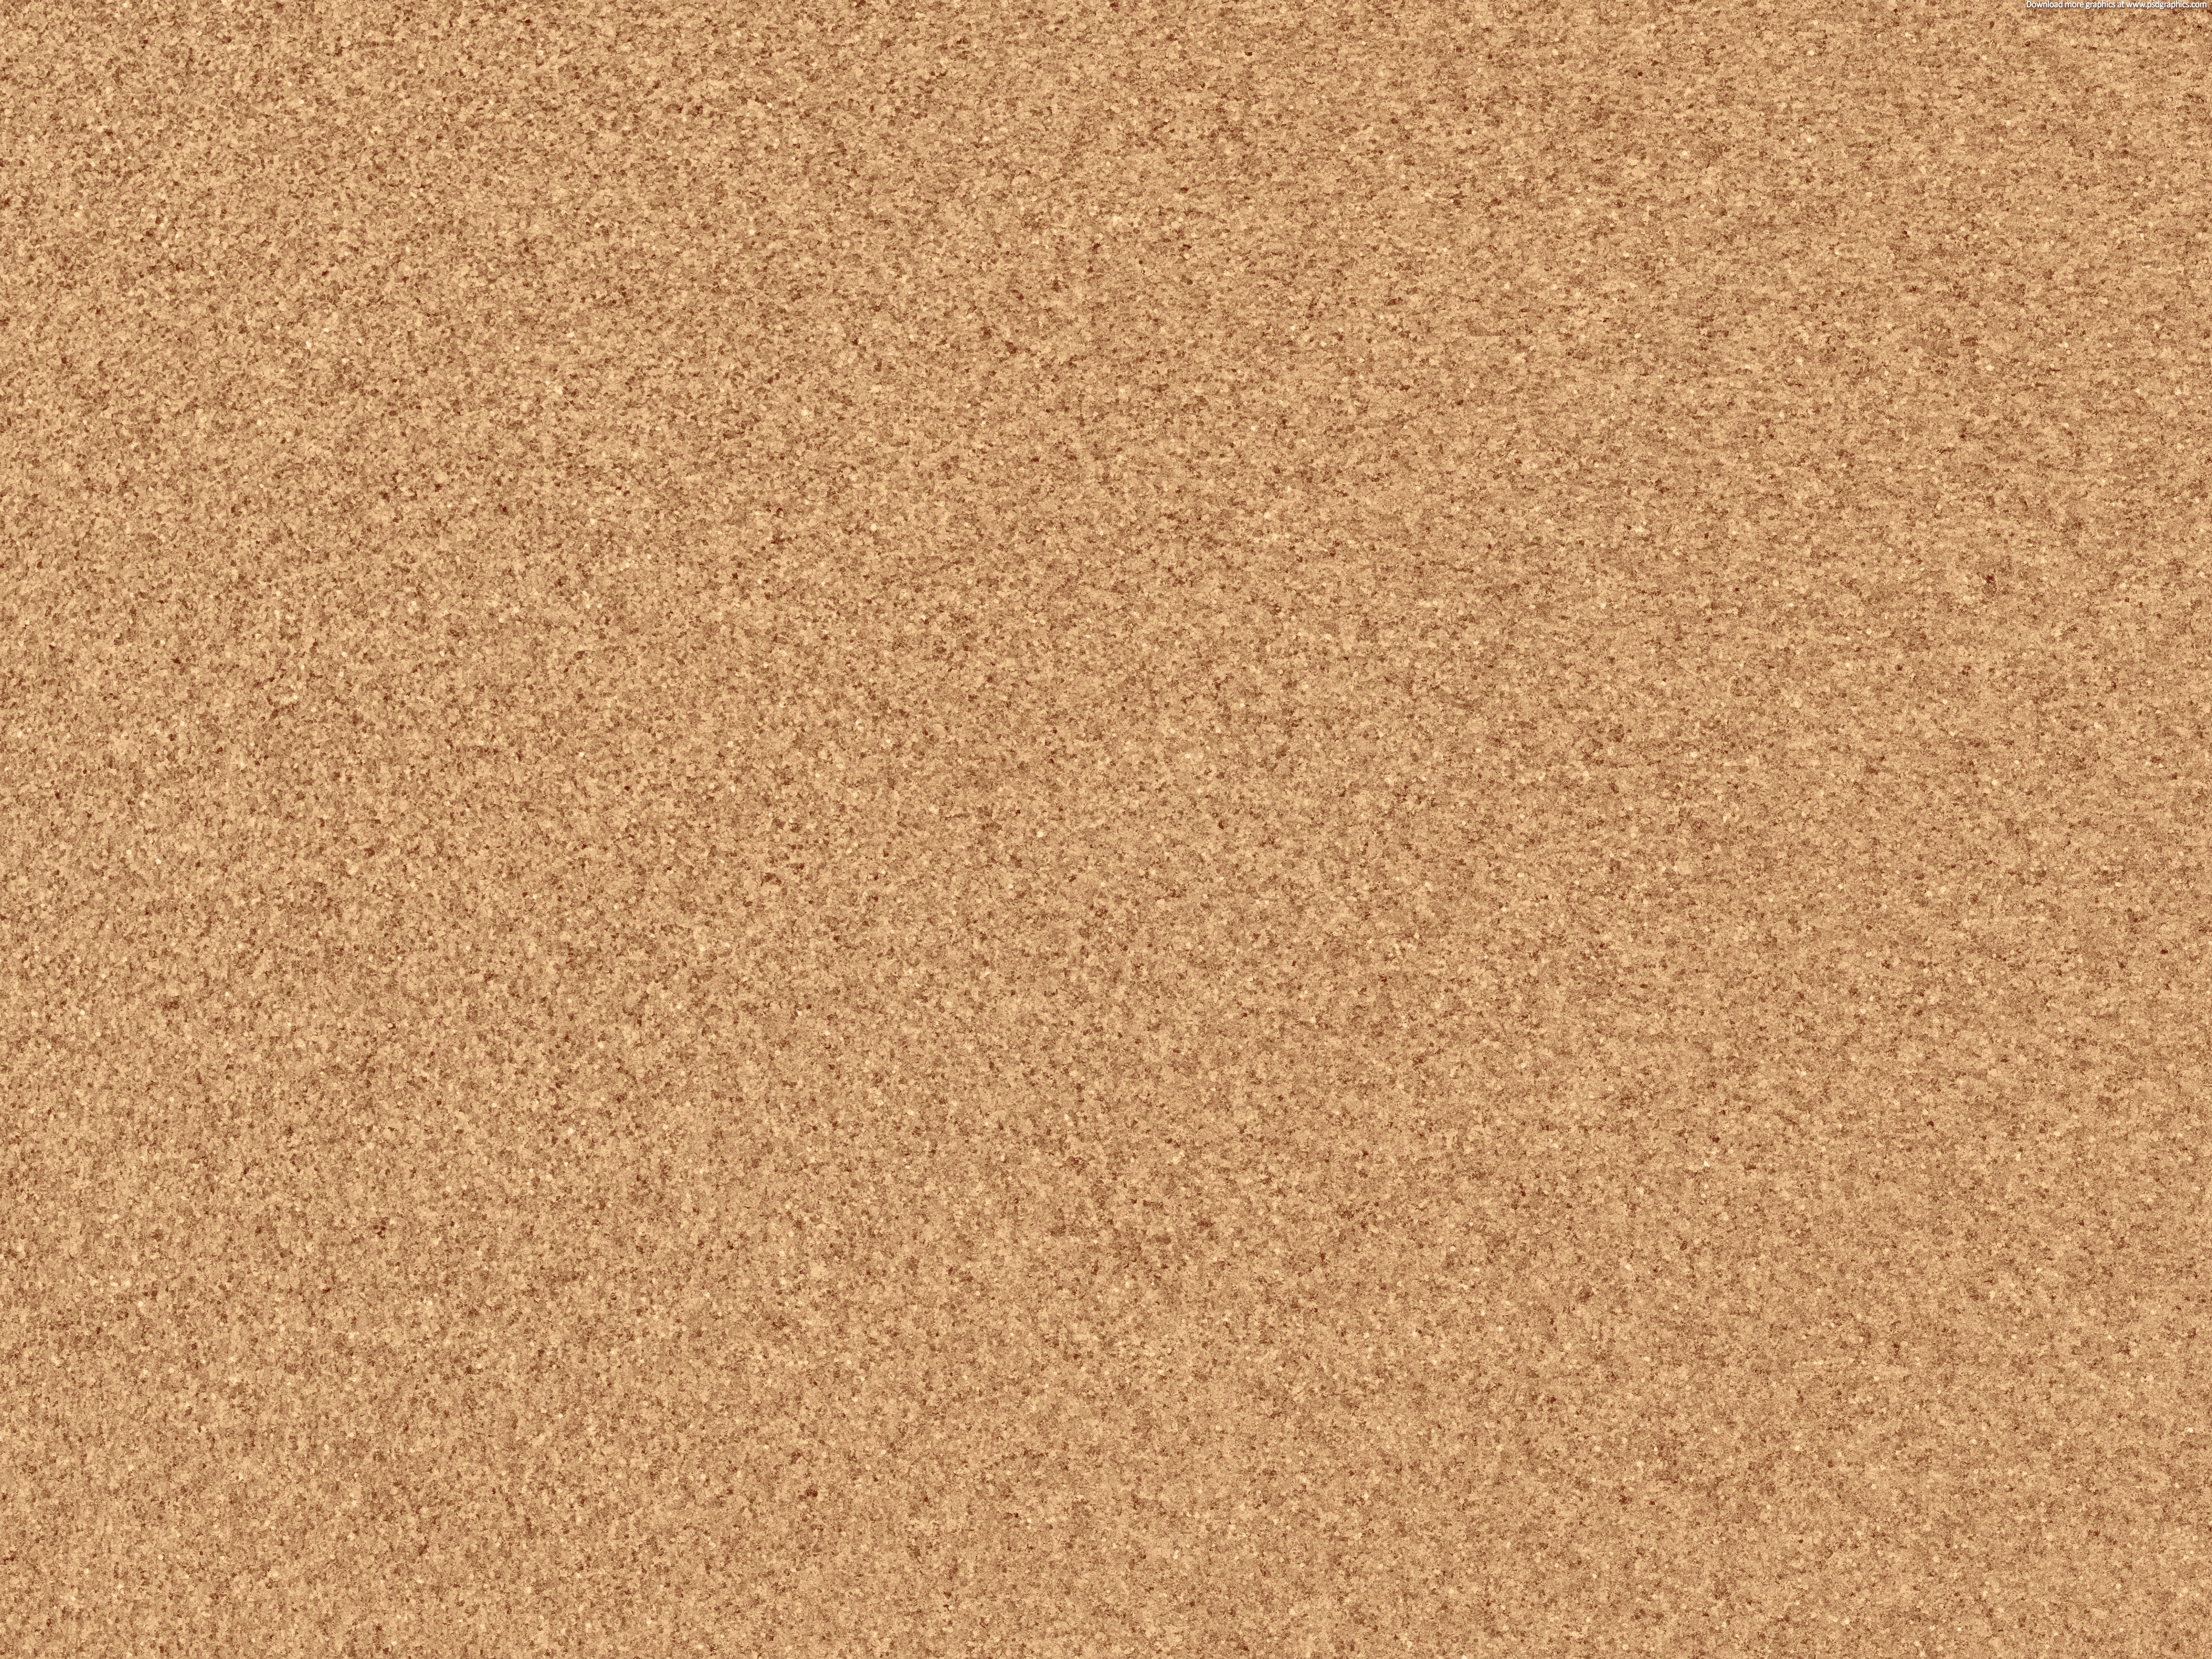 Plain White Paper Texture Top Pictures Gallery Online